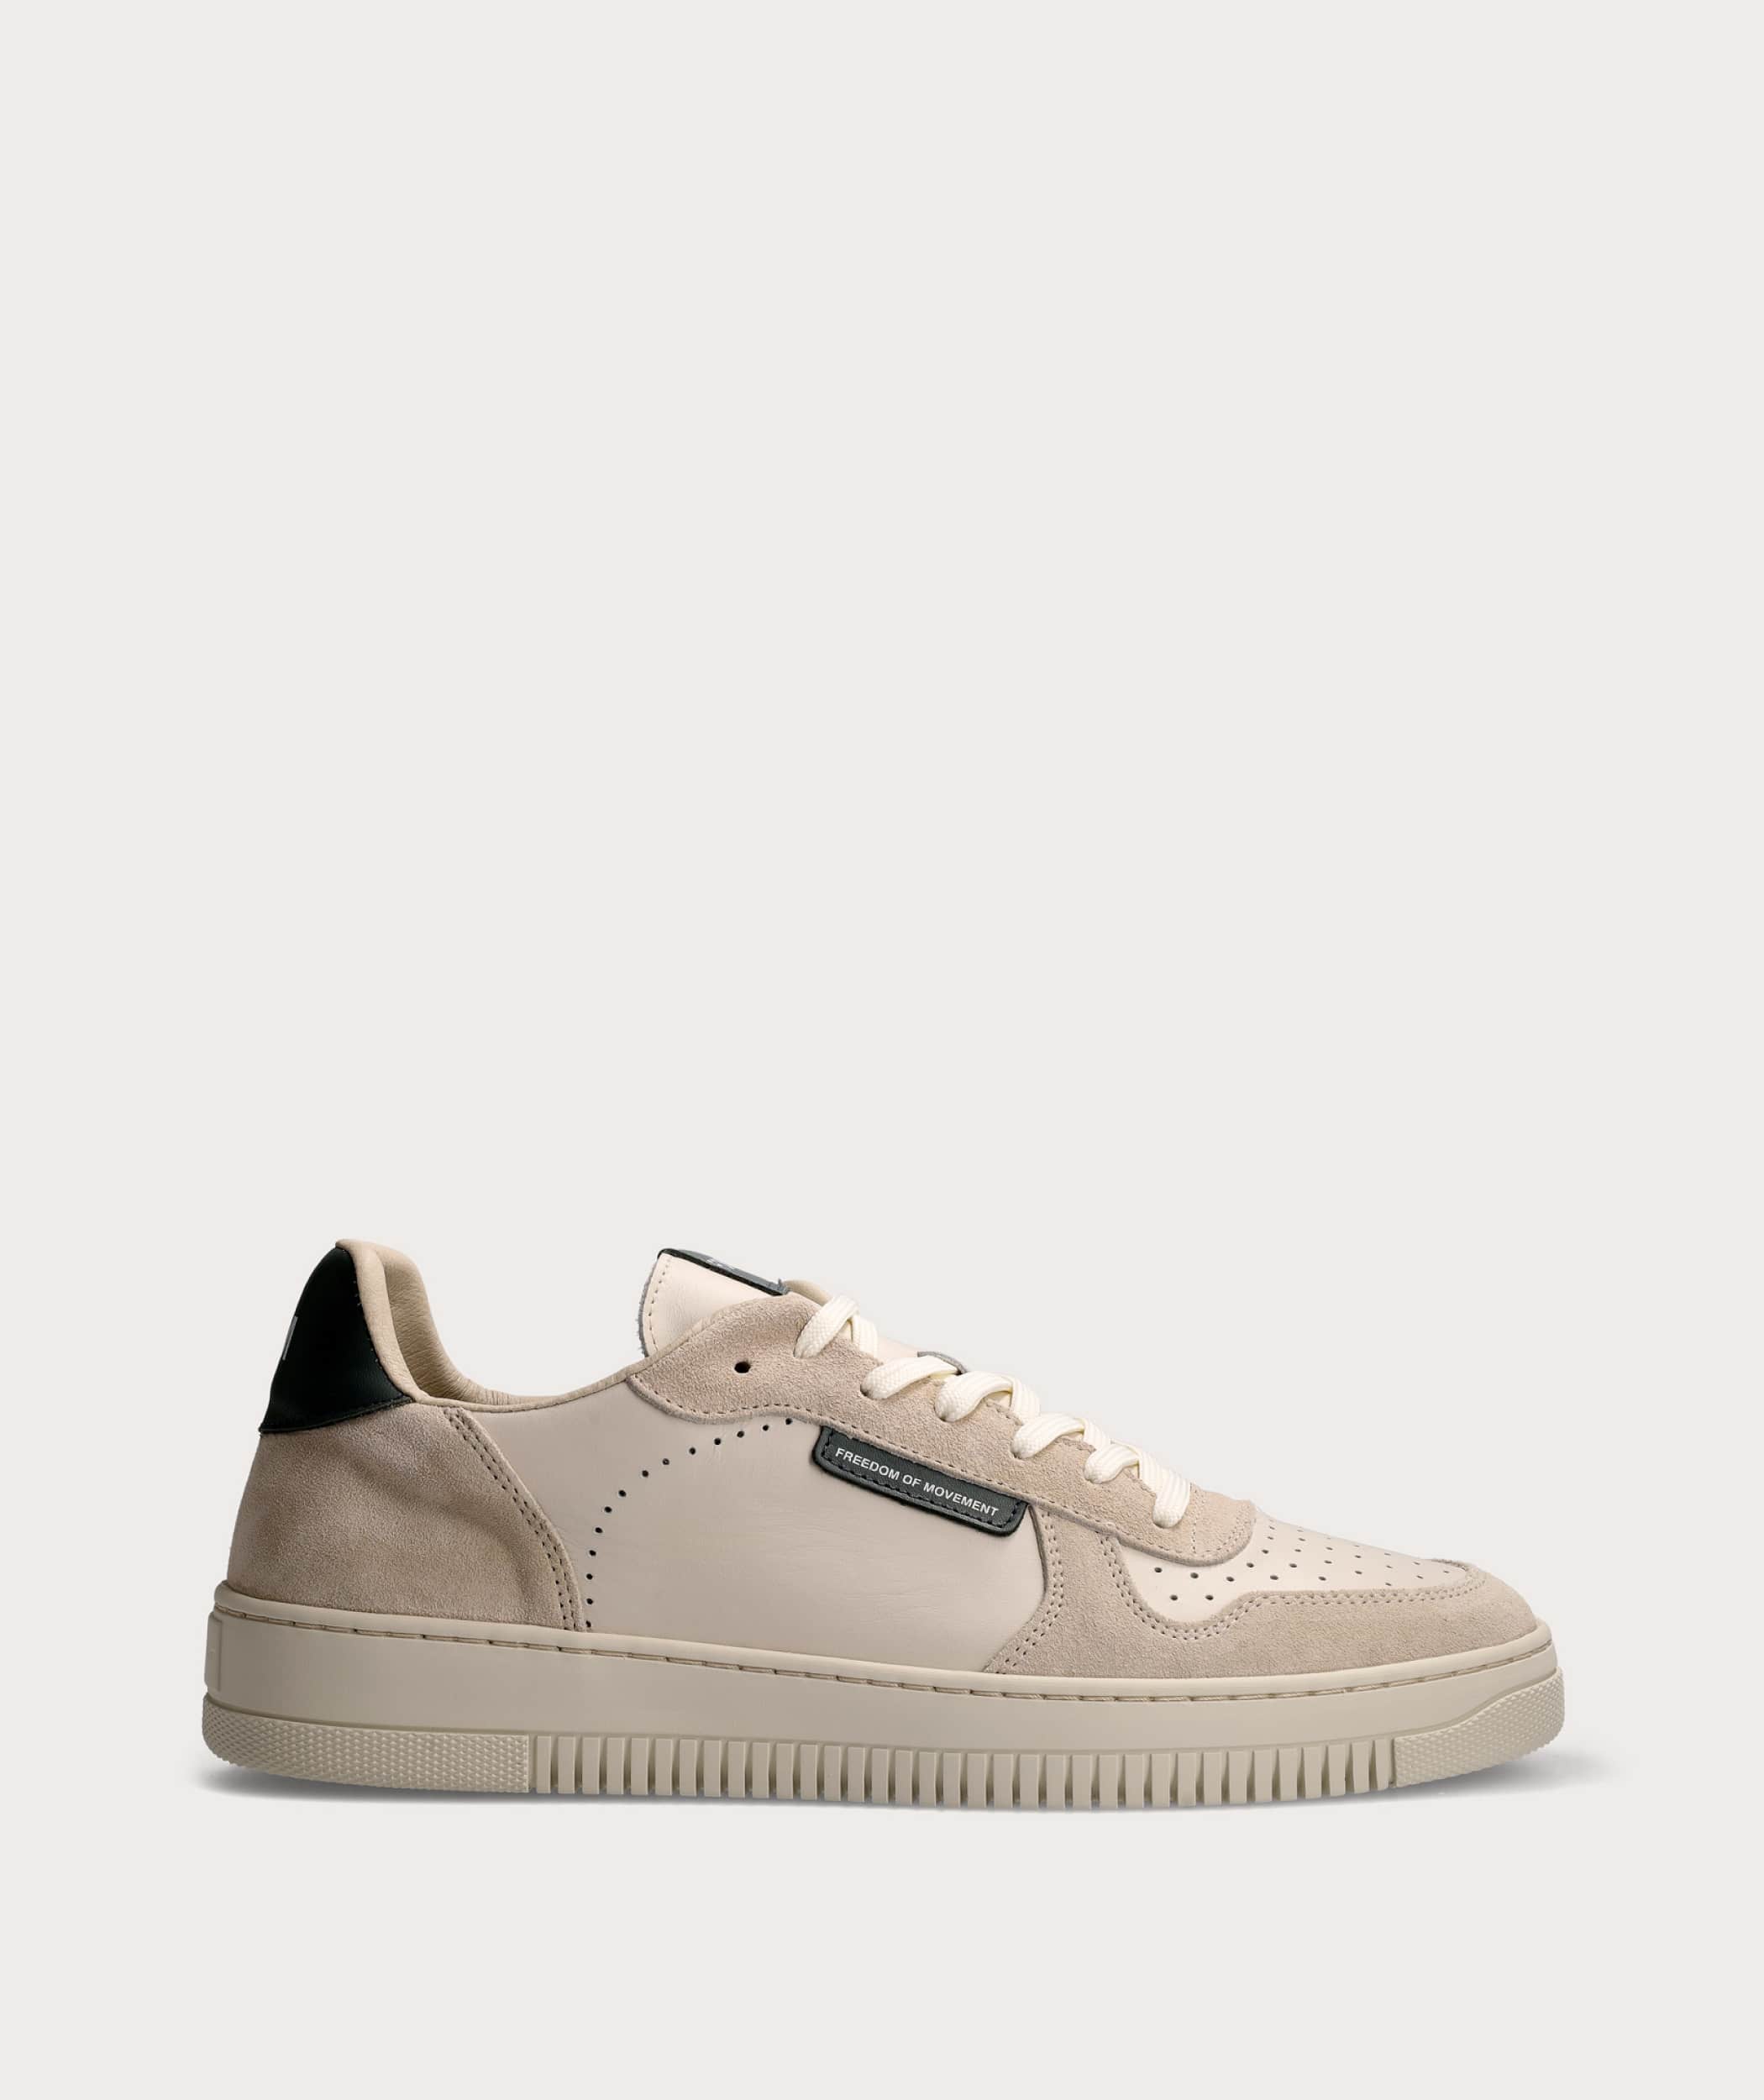 FOM MENS Trainers Off-White/ Ocean